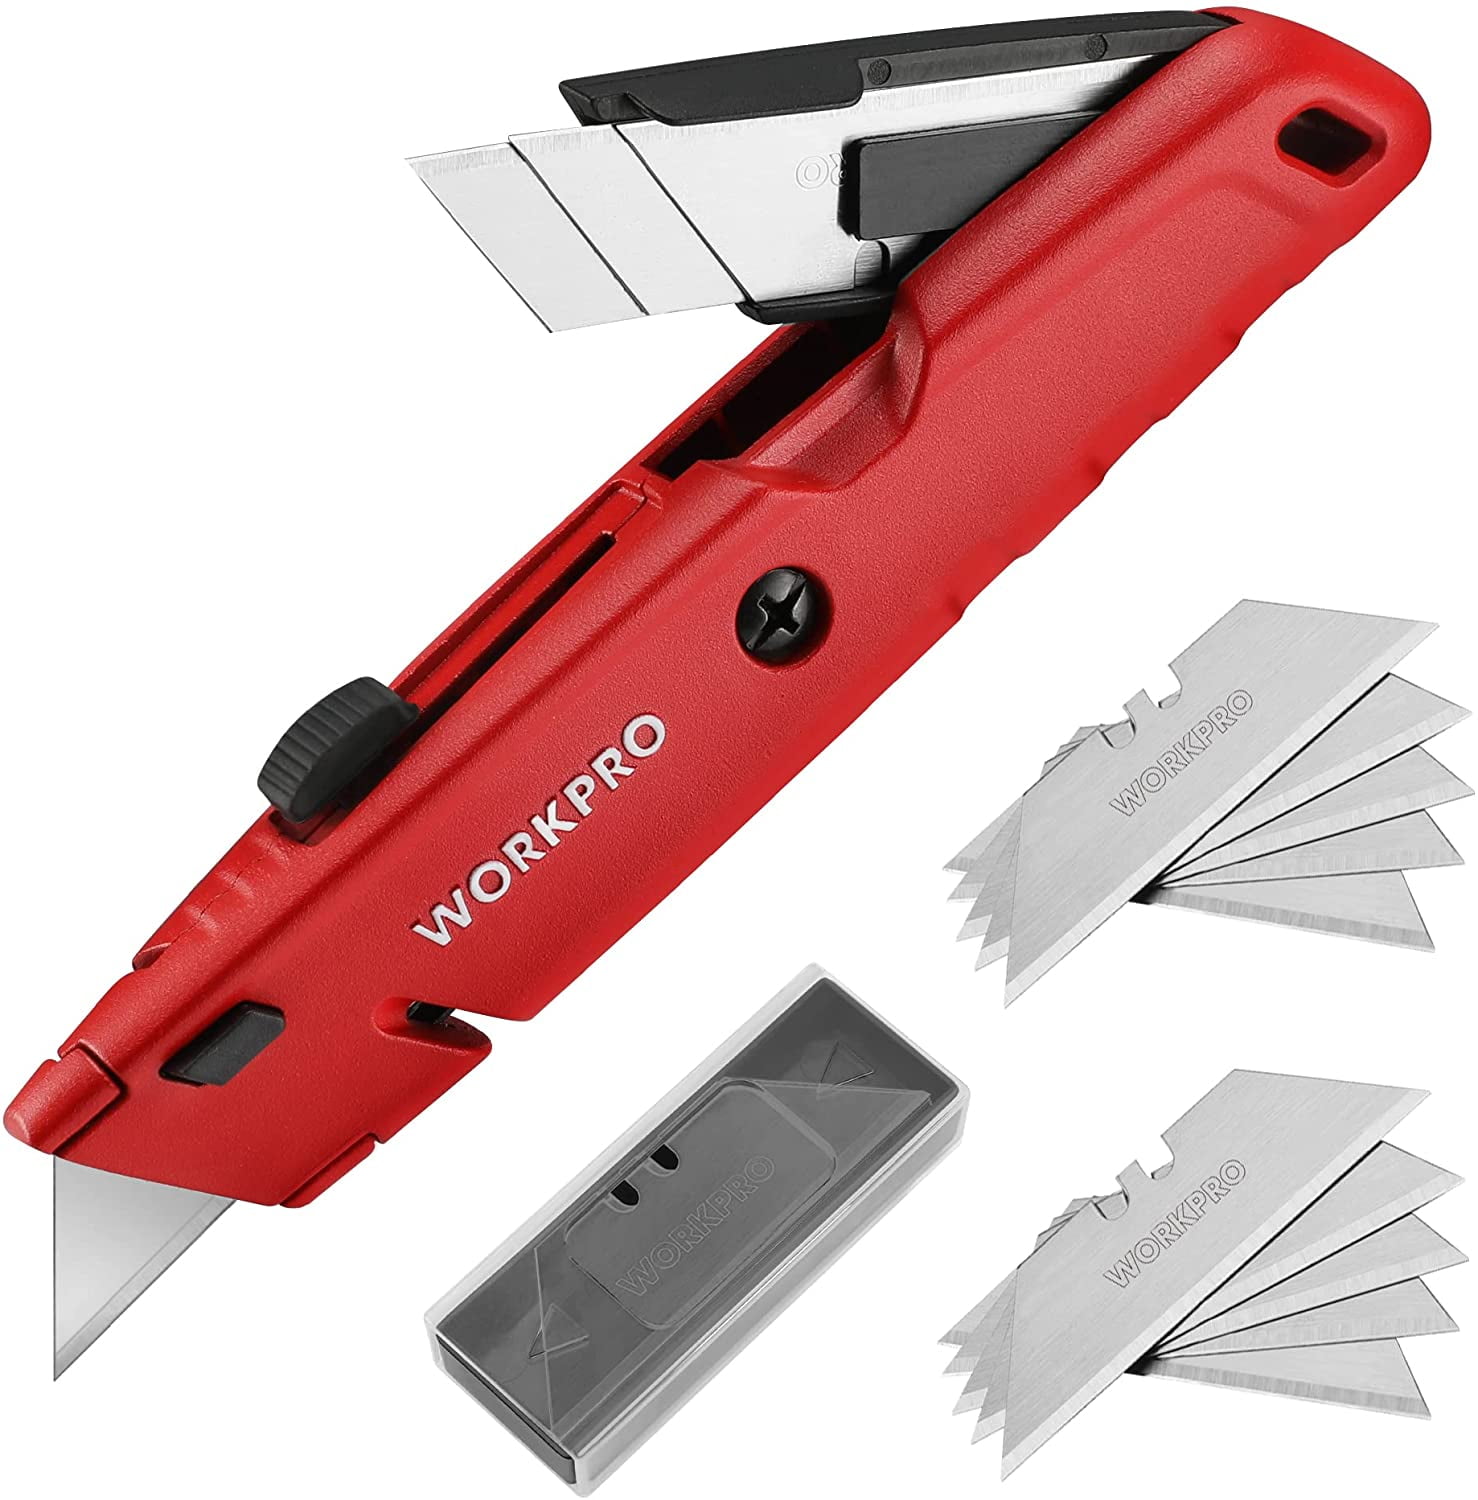 [15 Pack] EcoQuality Red Utility Knife Retractable Box Cutter for Cartons, Boxes, Cardboard 18mm Wide Blade Cutter Great for Warehouse, Office, Arts